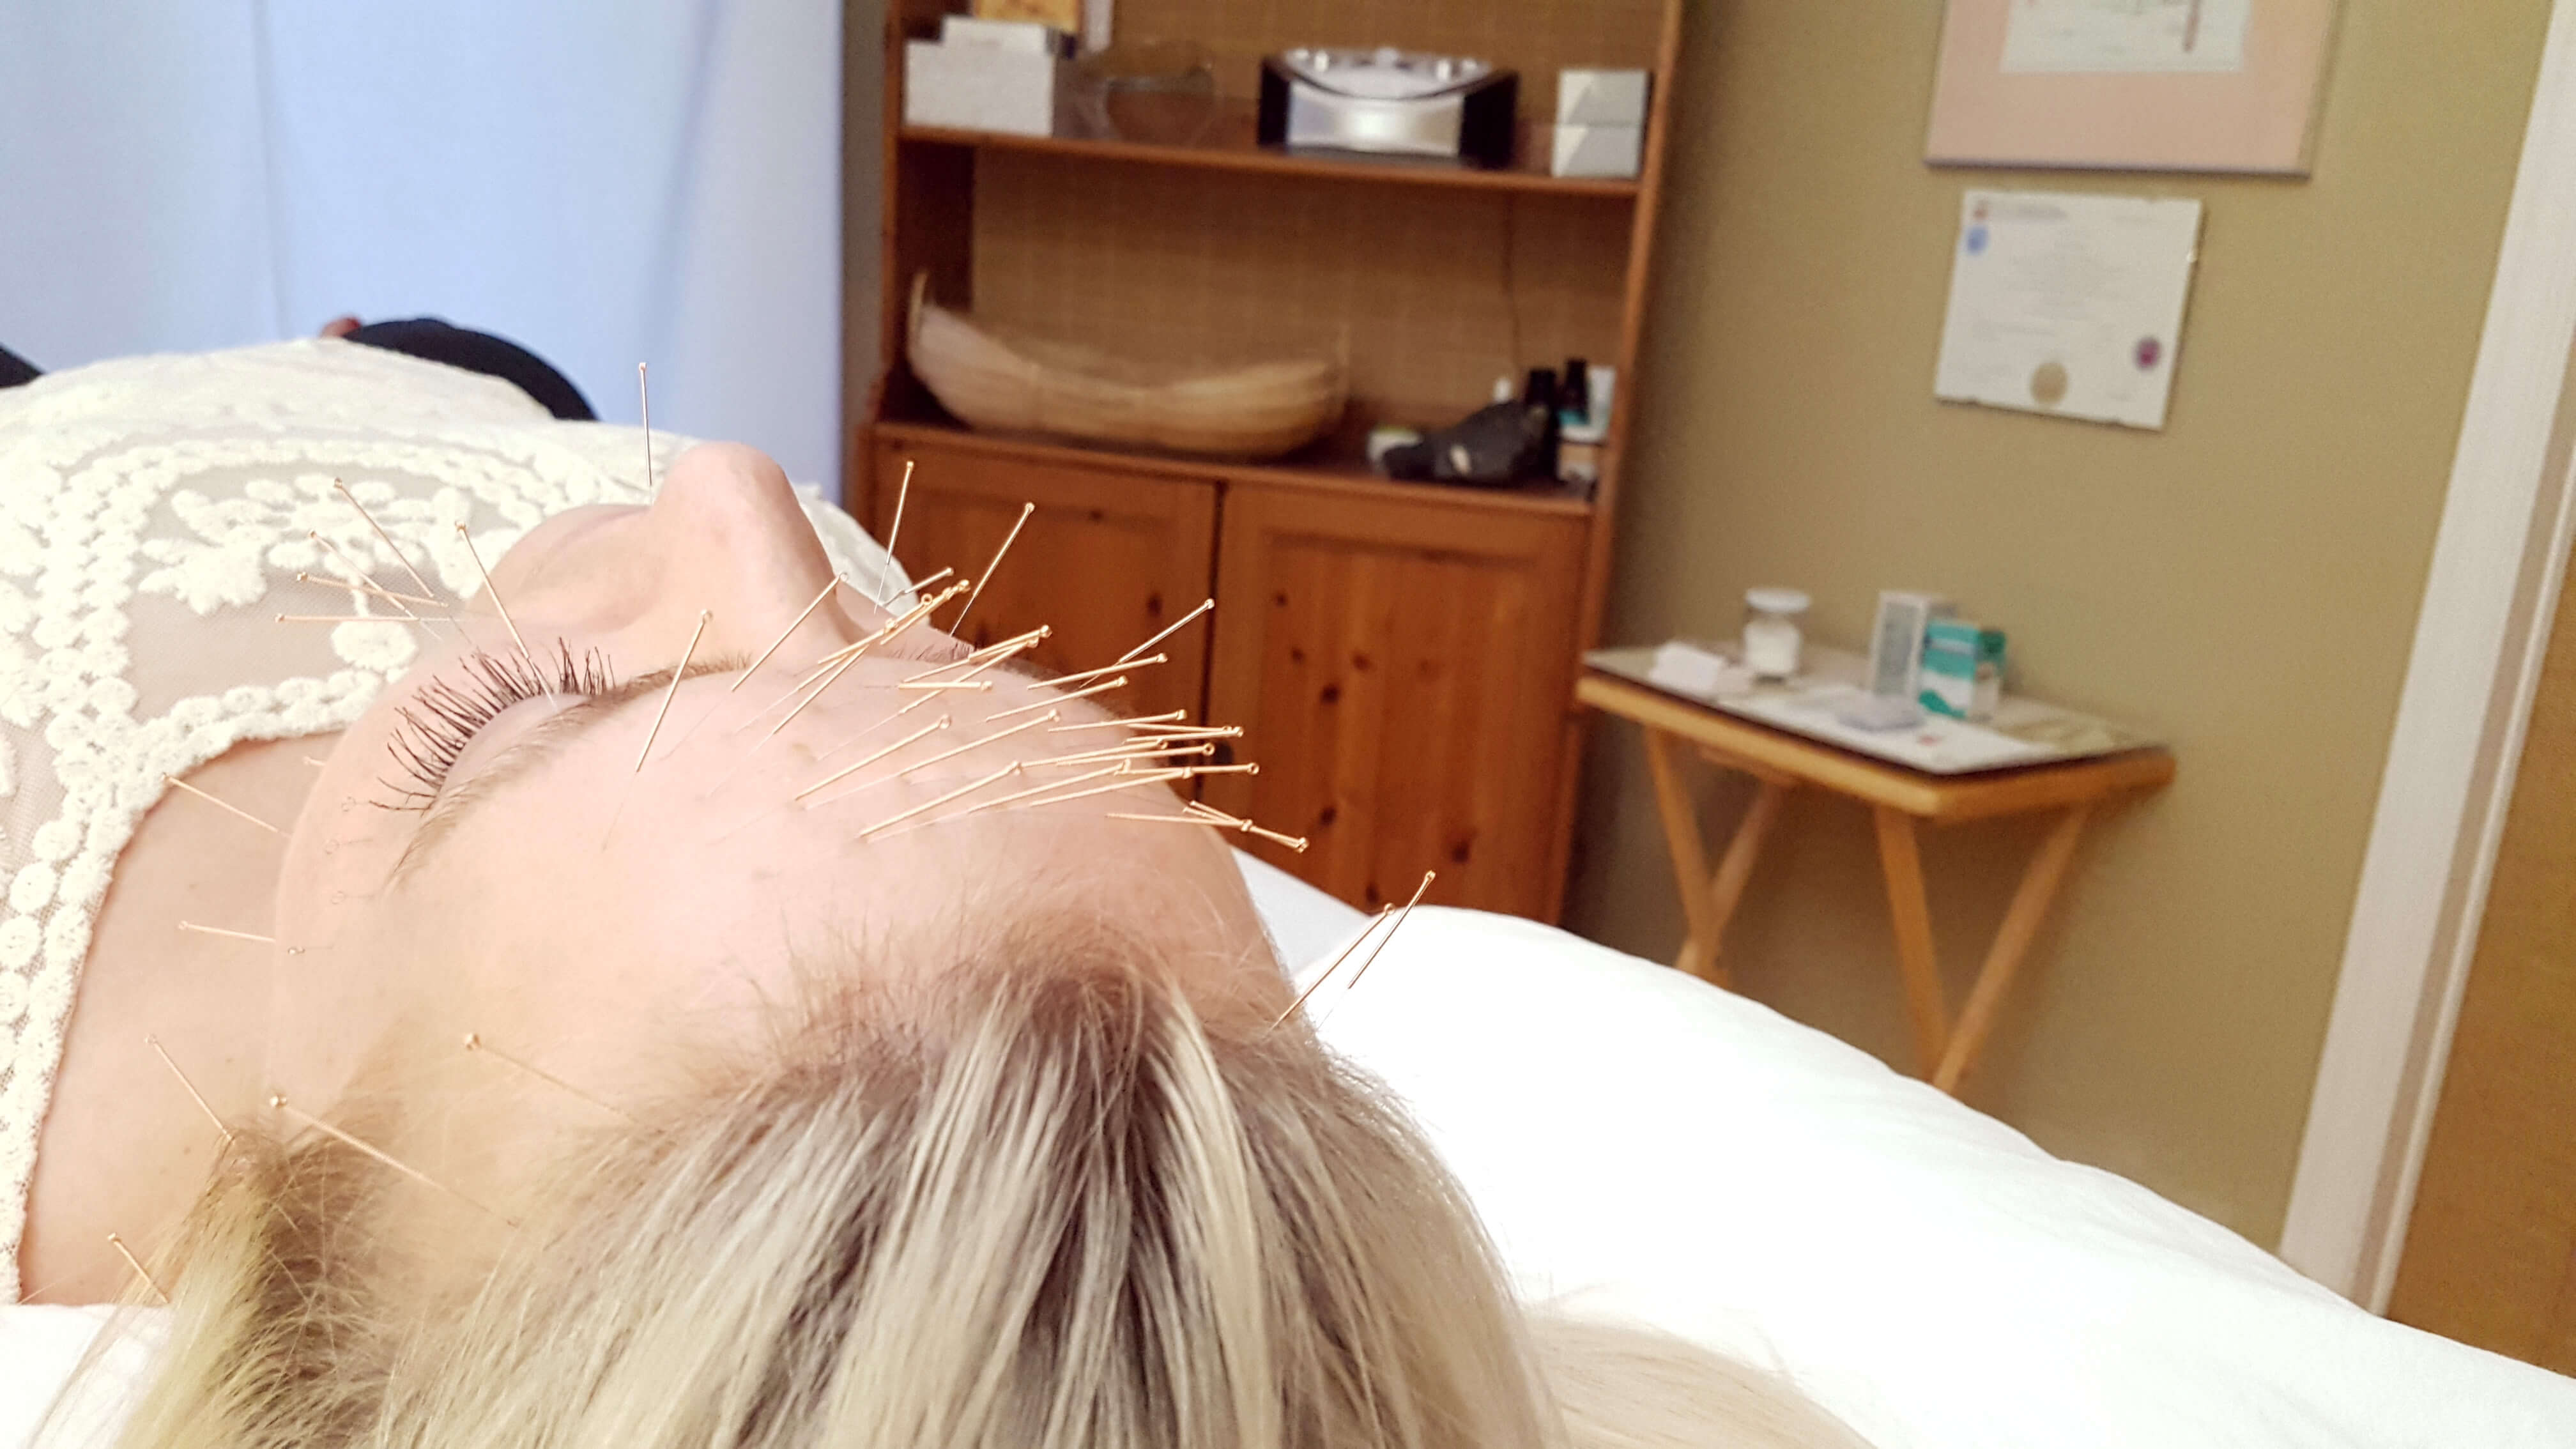 Actual client receiving cosmetic facial rejuvenation acupuncture at Harmony Acupuncture Kanata, Ottawa